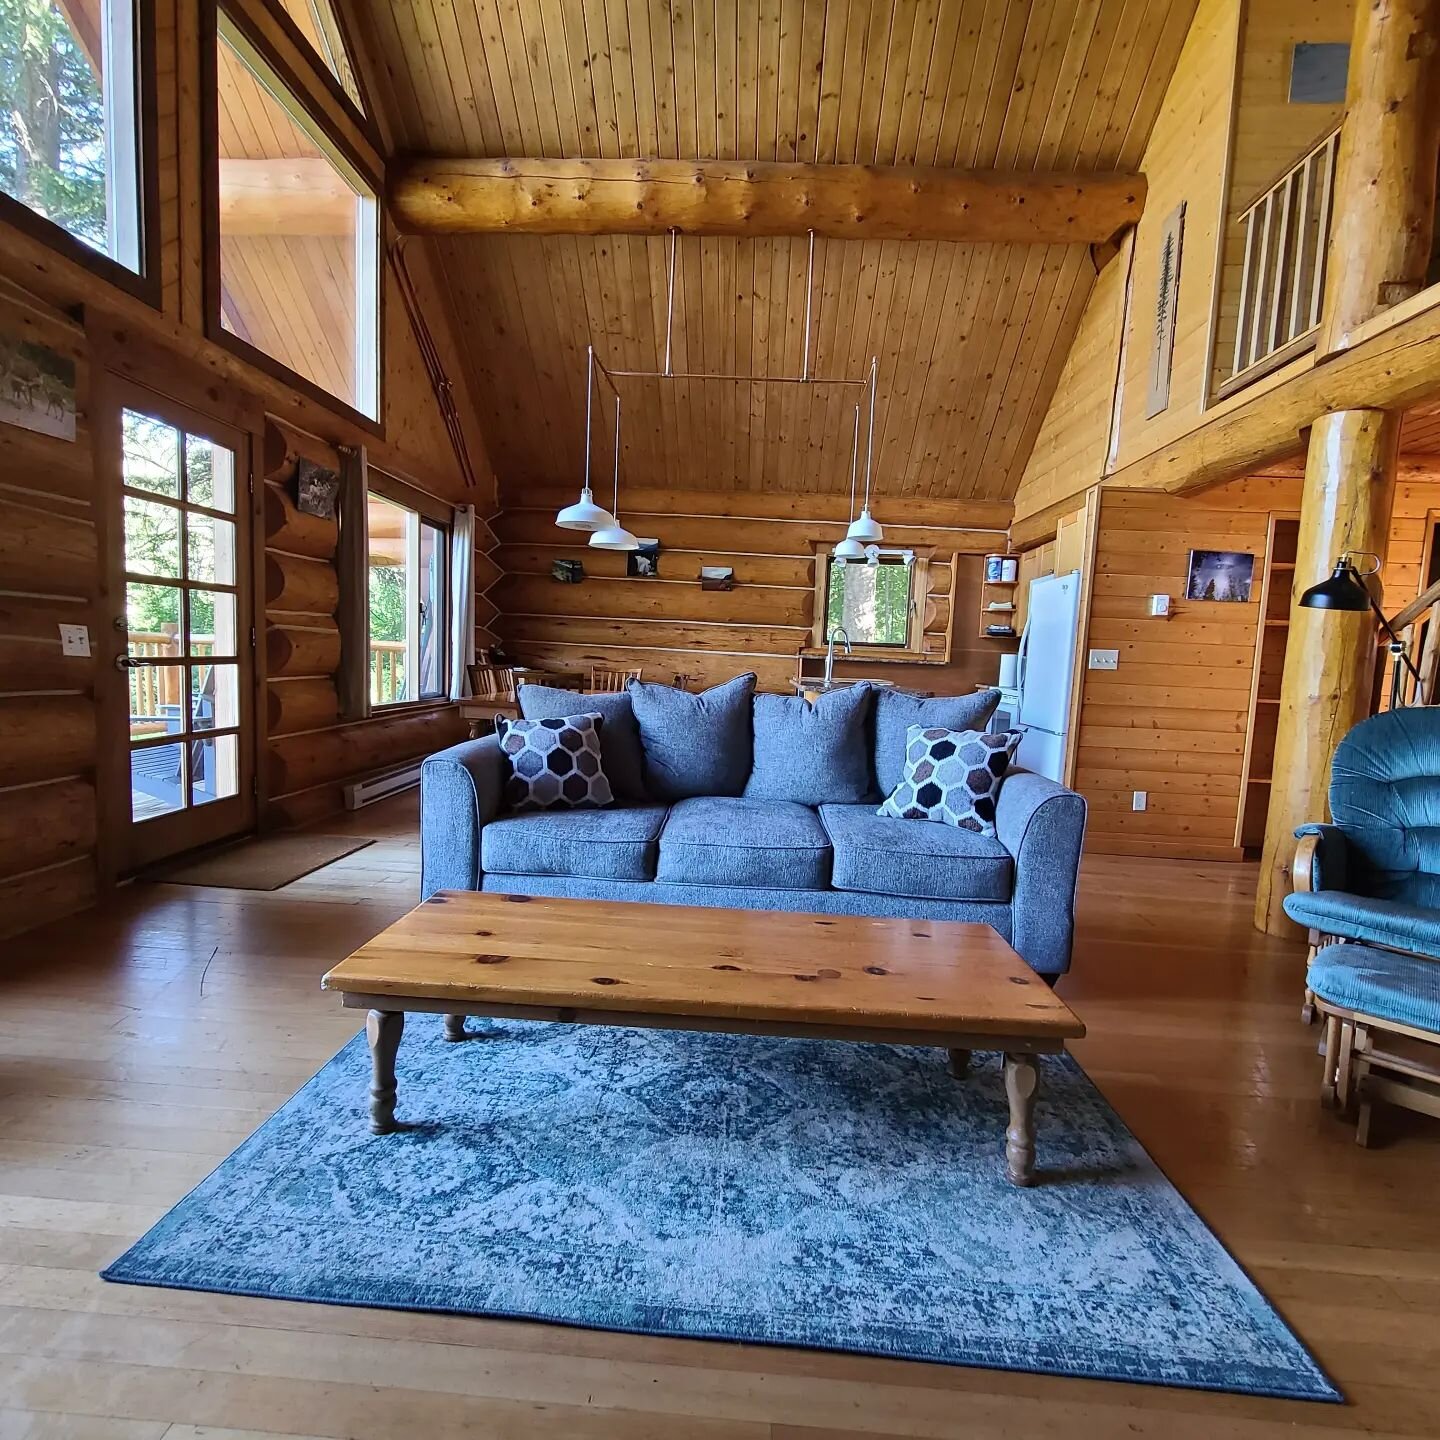 Hello comfy new couch! It may not be cozy in front of the fire season right now but what a good hang spot after a day of paddle boarding, swimming mountain biking, hiking, or all of the above! 
#chalet #logcabin #beautifuldestinations #britishcolumbi